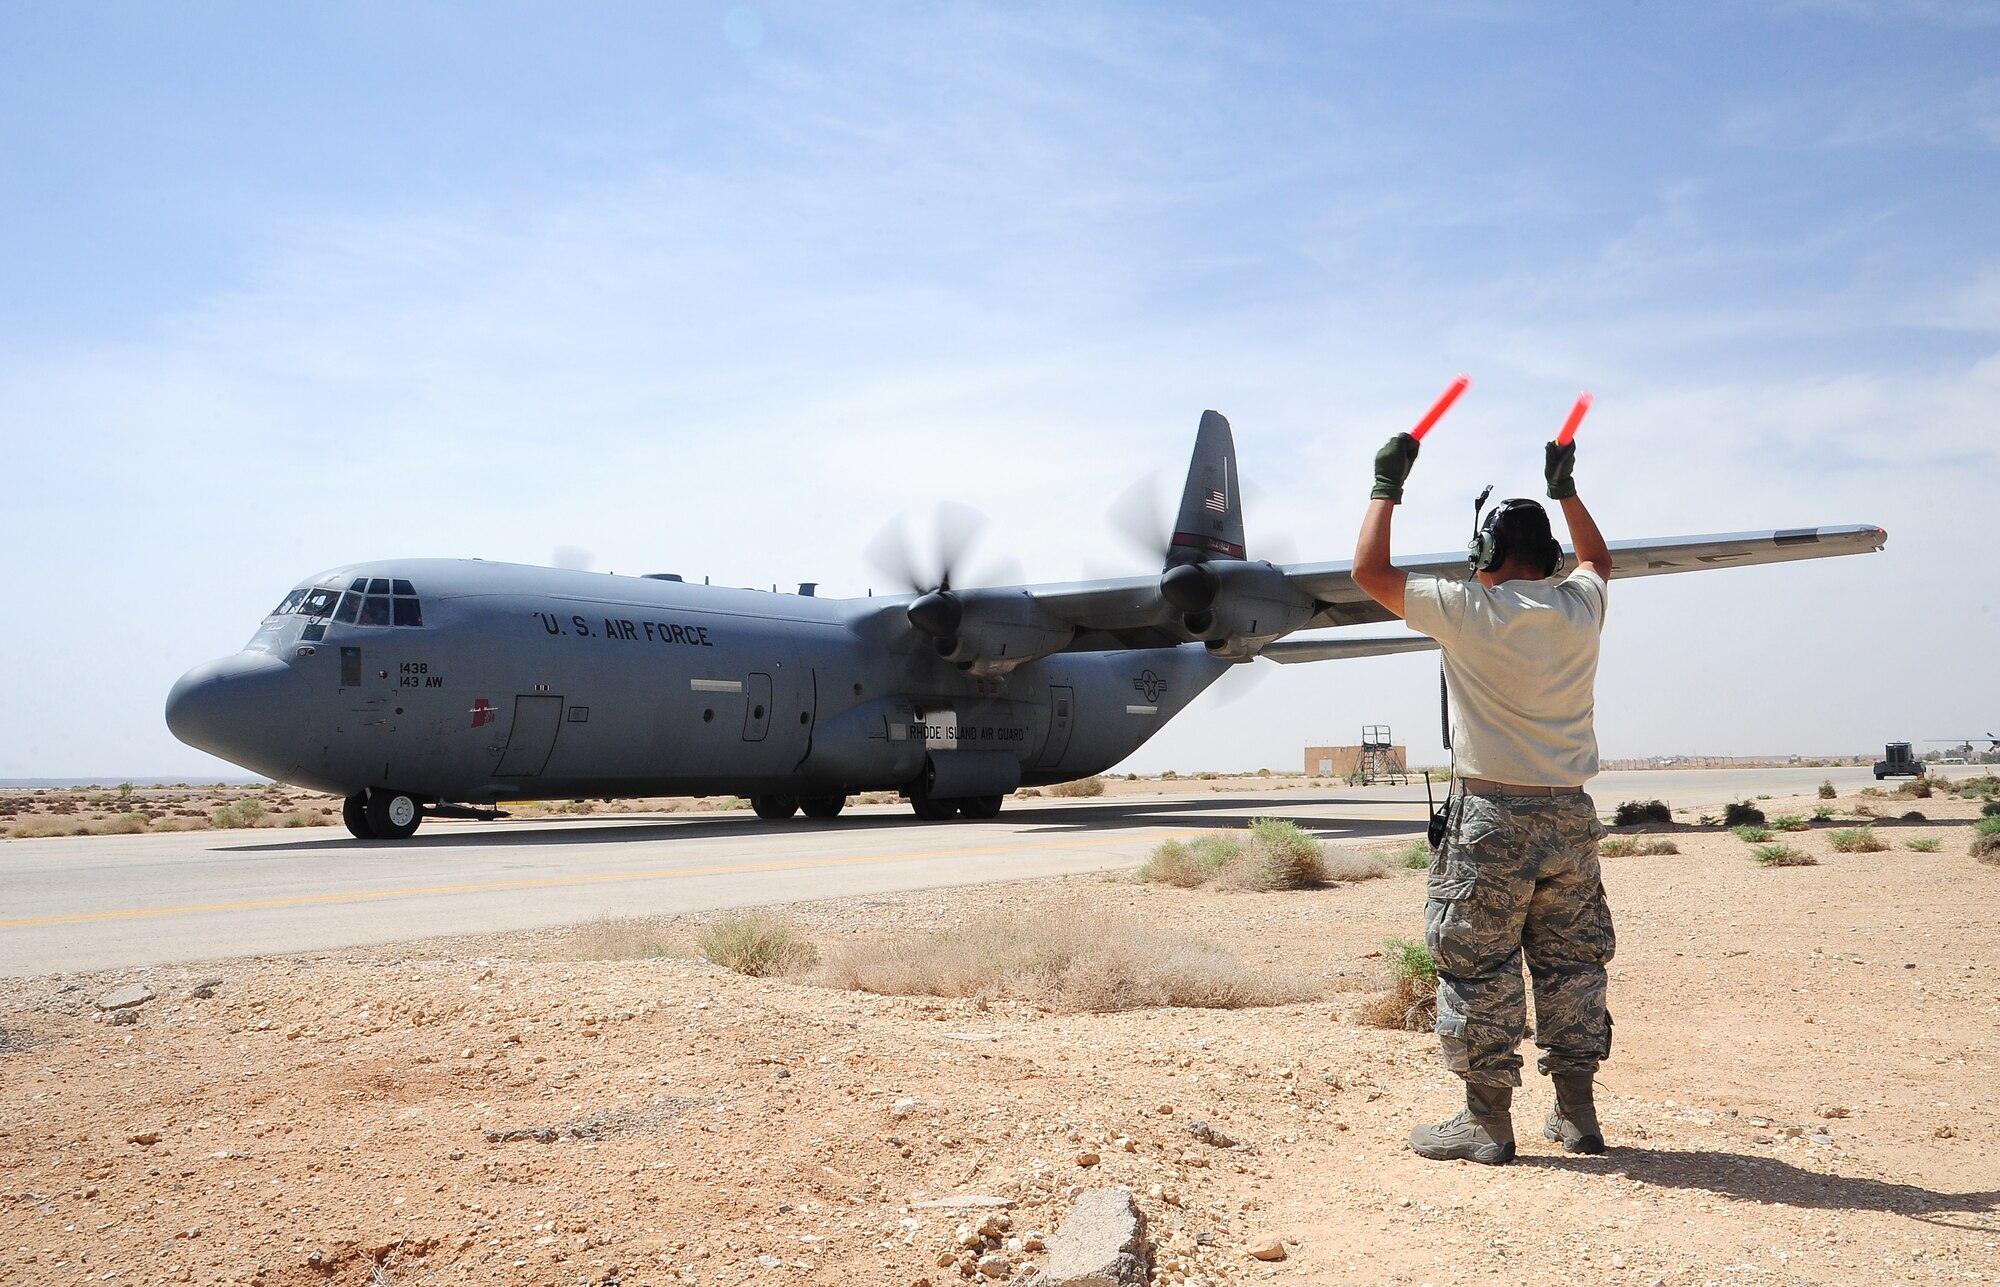 U.S. Air Force Staff Sgt. Willeams Roldan, a crew chief with the 146th Aircraft Maintenance Squadron at Channel Islands Air National Guard Station, Calif., marshals a C-130J Hercules for takeoff during Exercise Eager Lion May 29, 2014, at an air base in northern Jordan. Working alongside partner nation forces gave the U.S. military a chance to enhance their readiness and practice crisis management. (U.S. Air Force photo by Staff Sgt. Brigitte N. Brantley/Released)